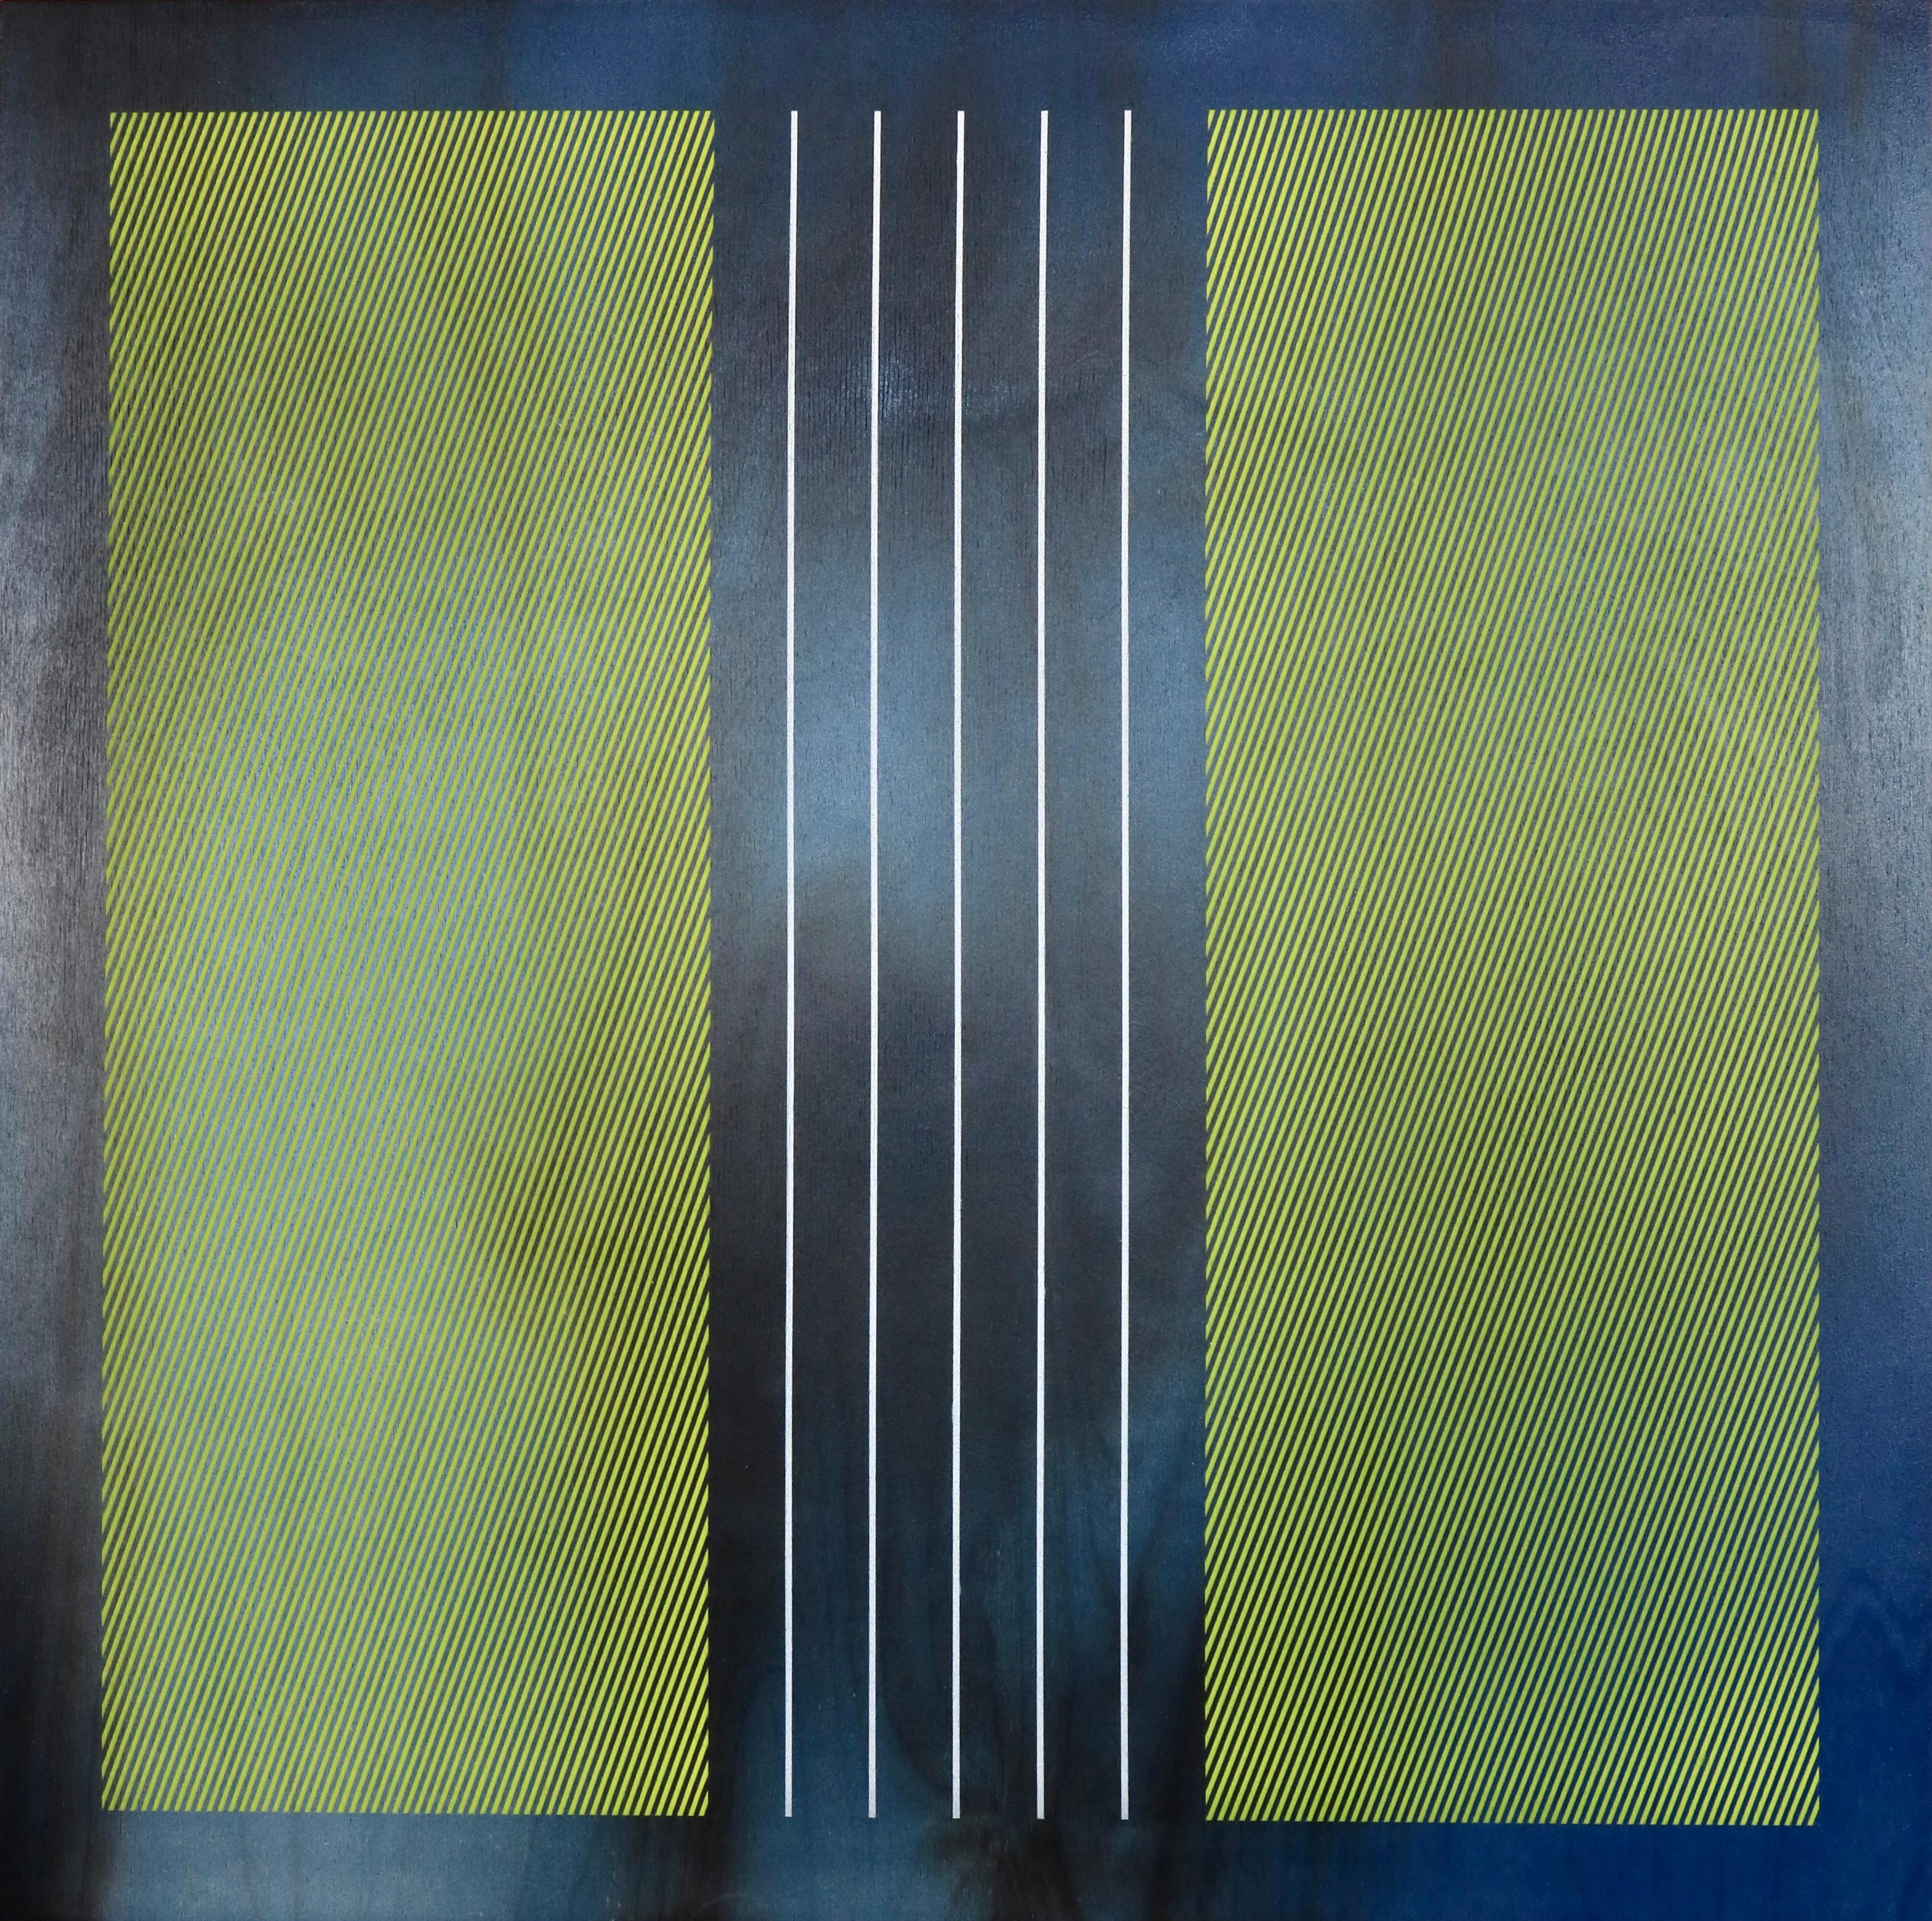 3 Mangatas tryptic panels as column (or row) (tryptic, squares, minimal, grid) - Minimalist Painting by Melisa Taylor Metzger